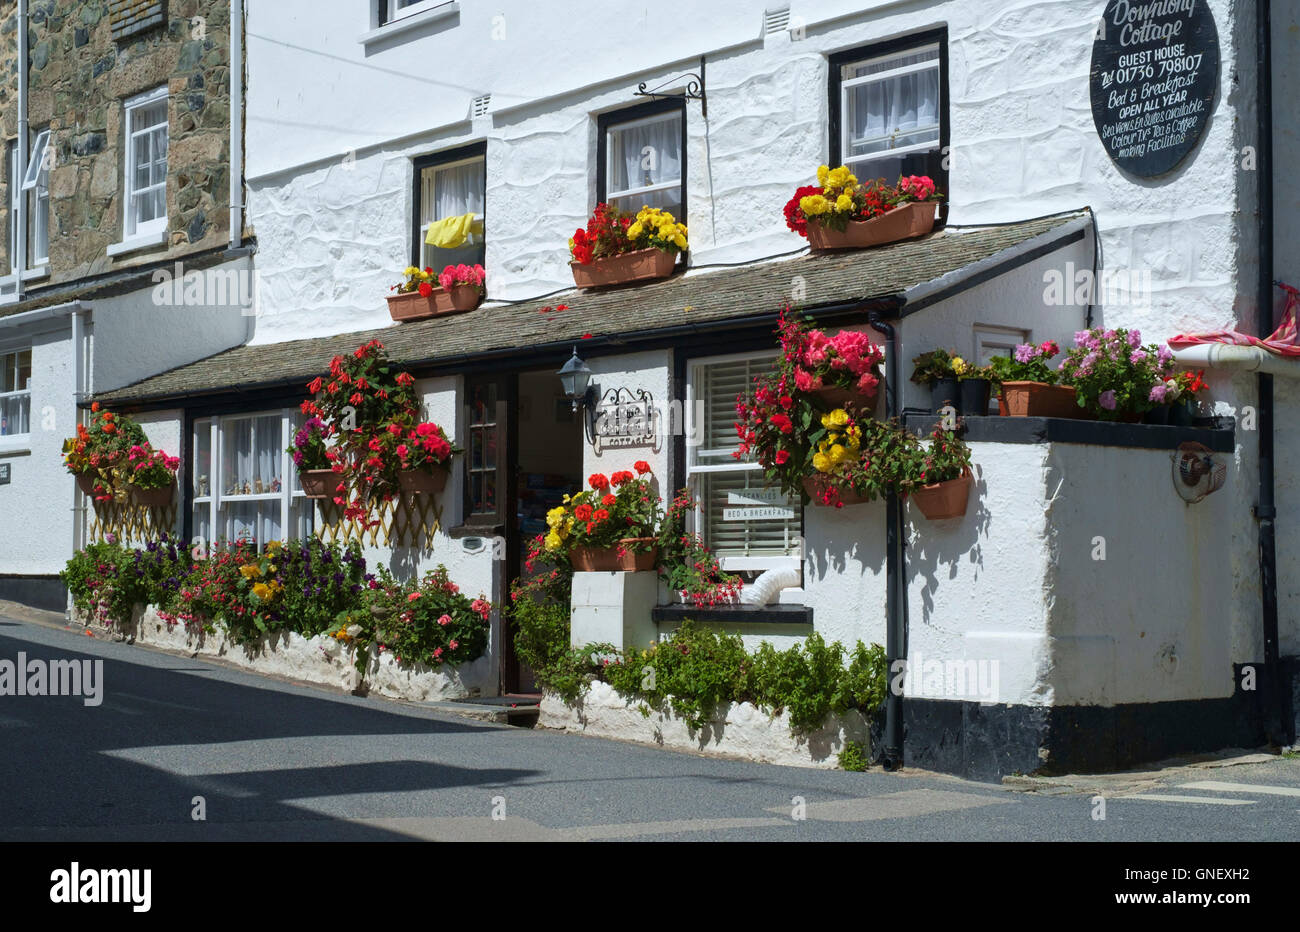 St Ives eine Stadt am Meer in Cornwall England UK Downalong Cottage Bed And Breakfast in B & B Stockfoto